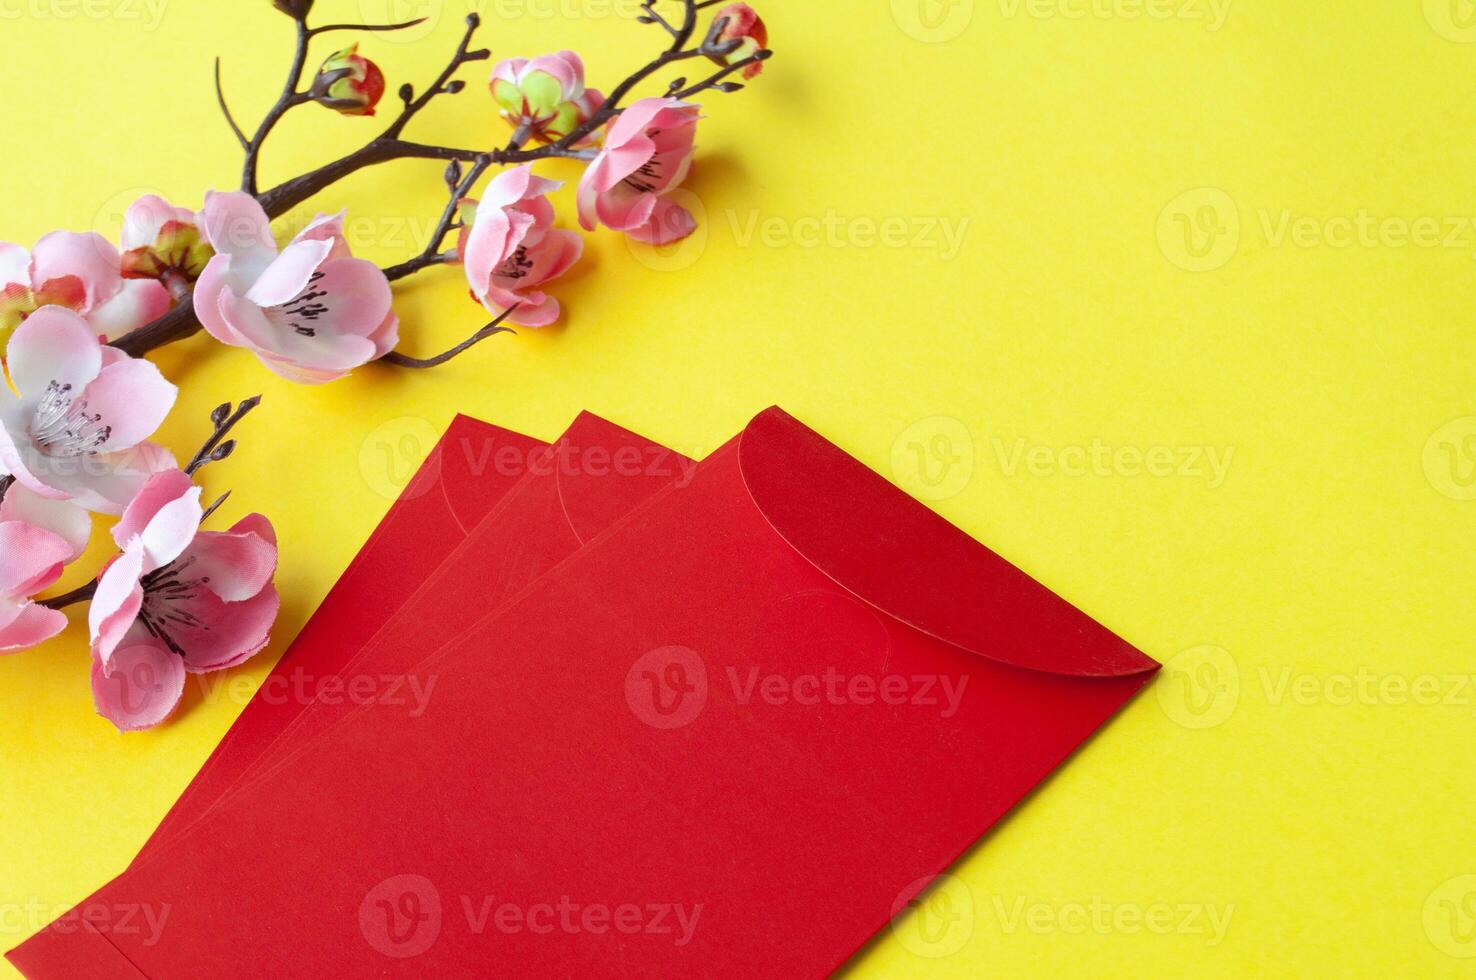 Chinese New Year red packet with customizable space for text or wishes. Chinese New Year celebration concept photo